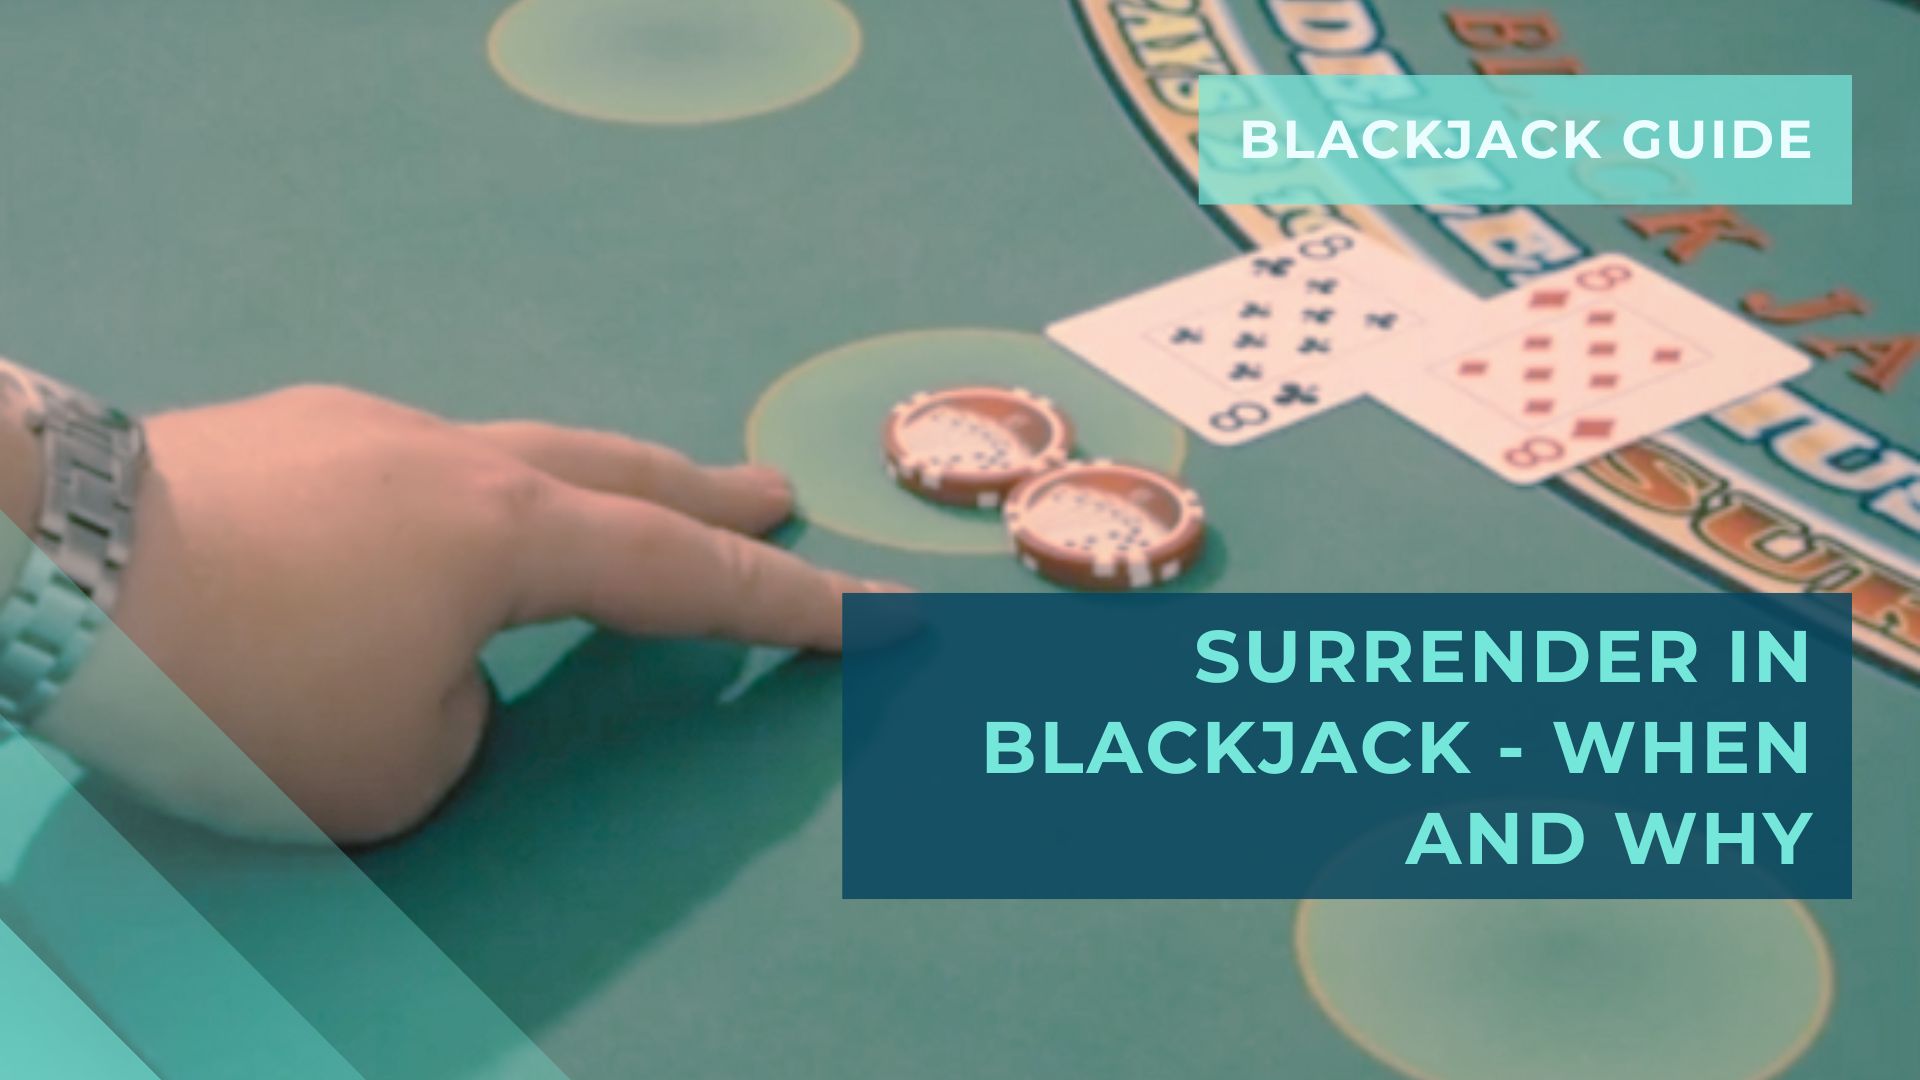 Surrender in Blackjack - when and why